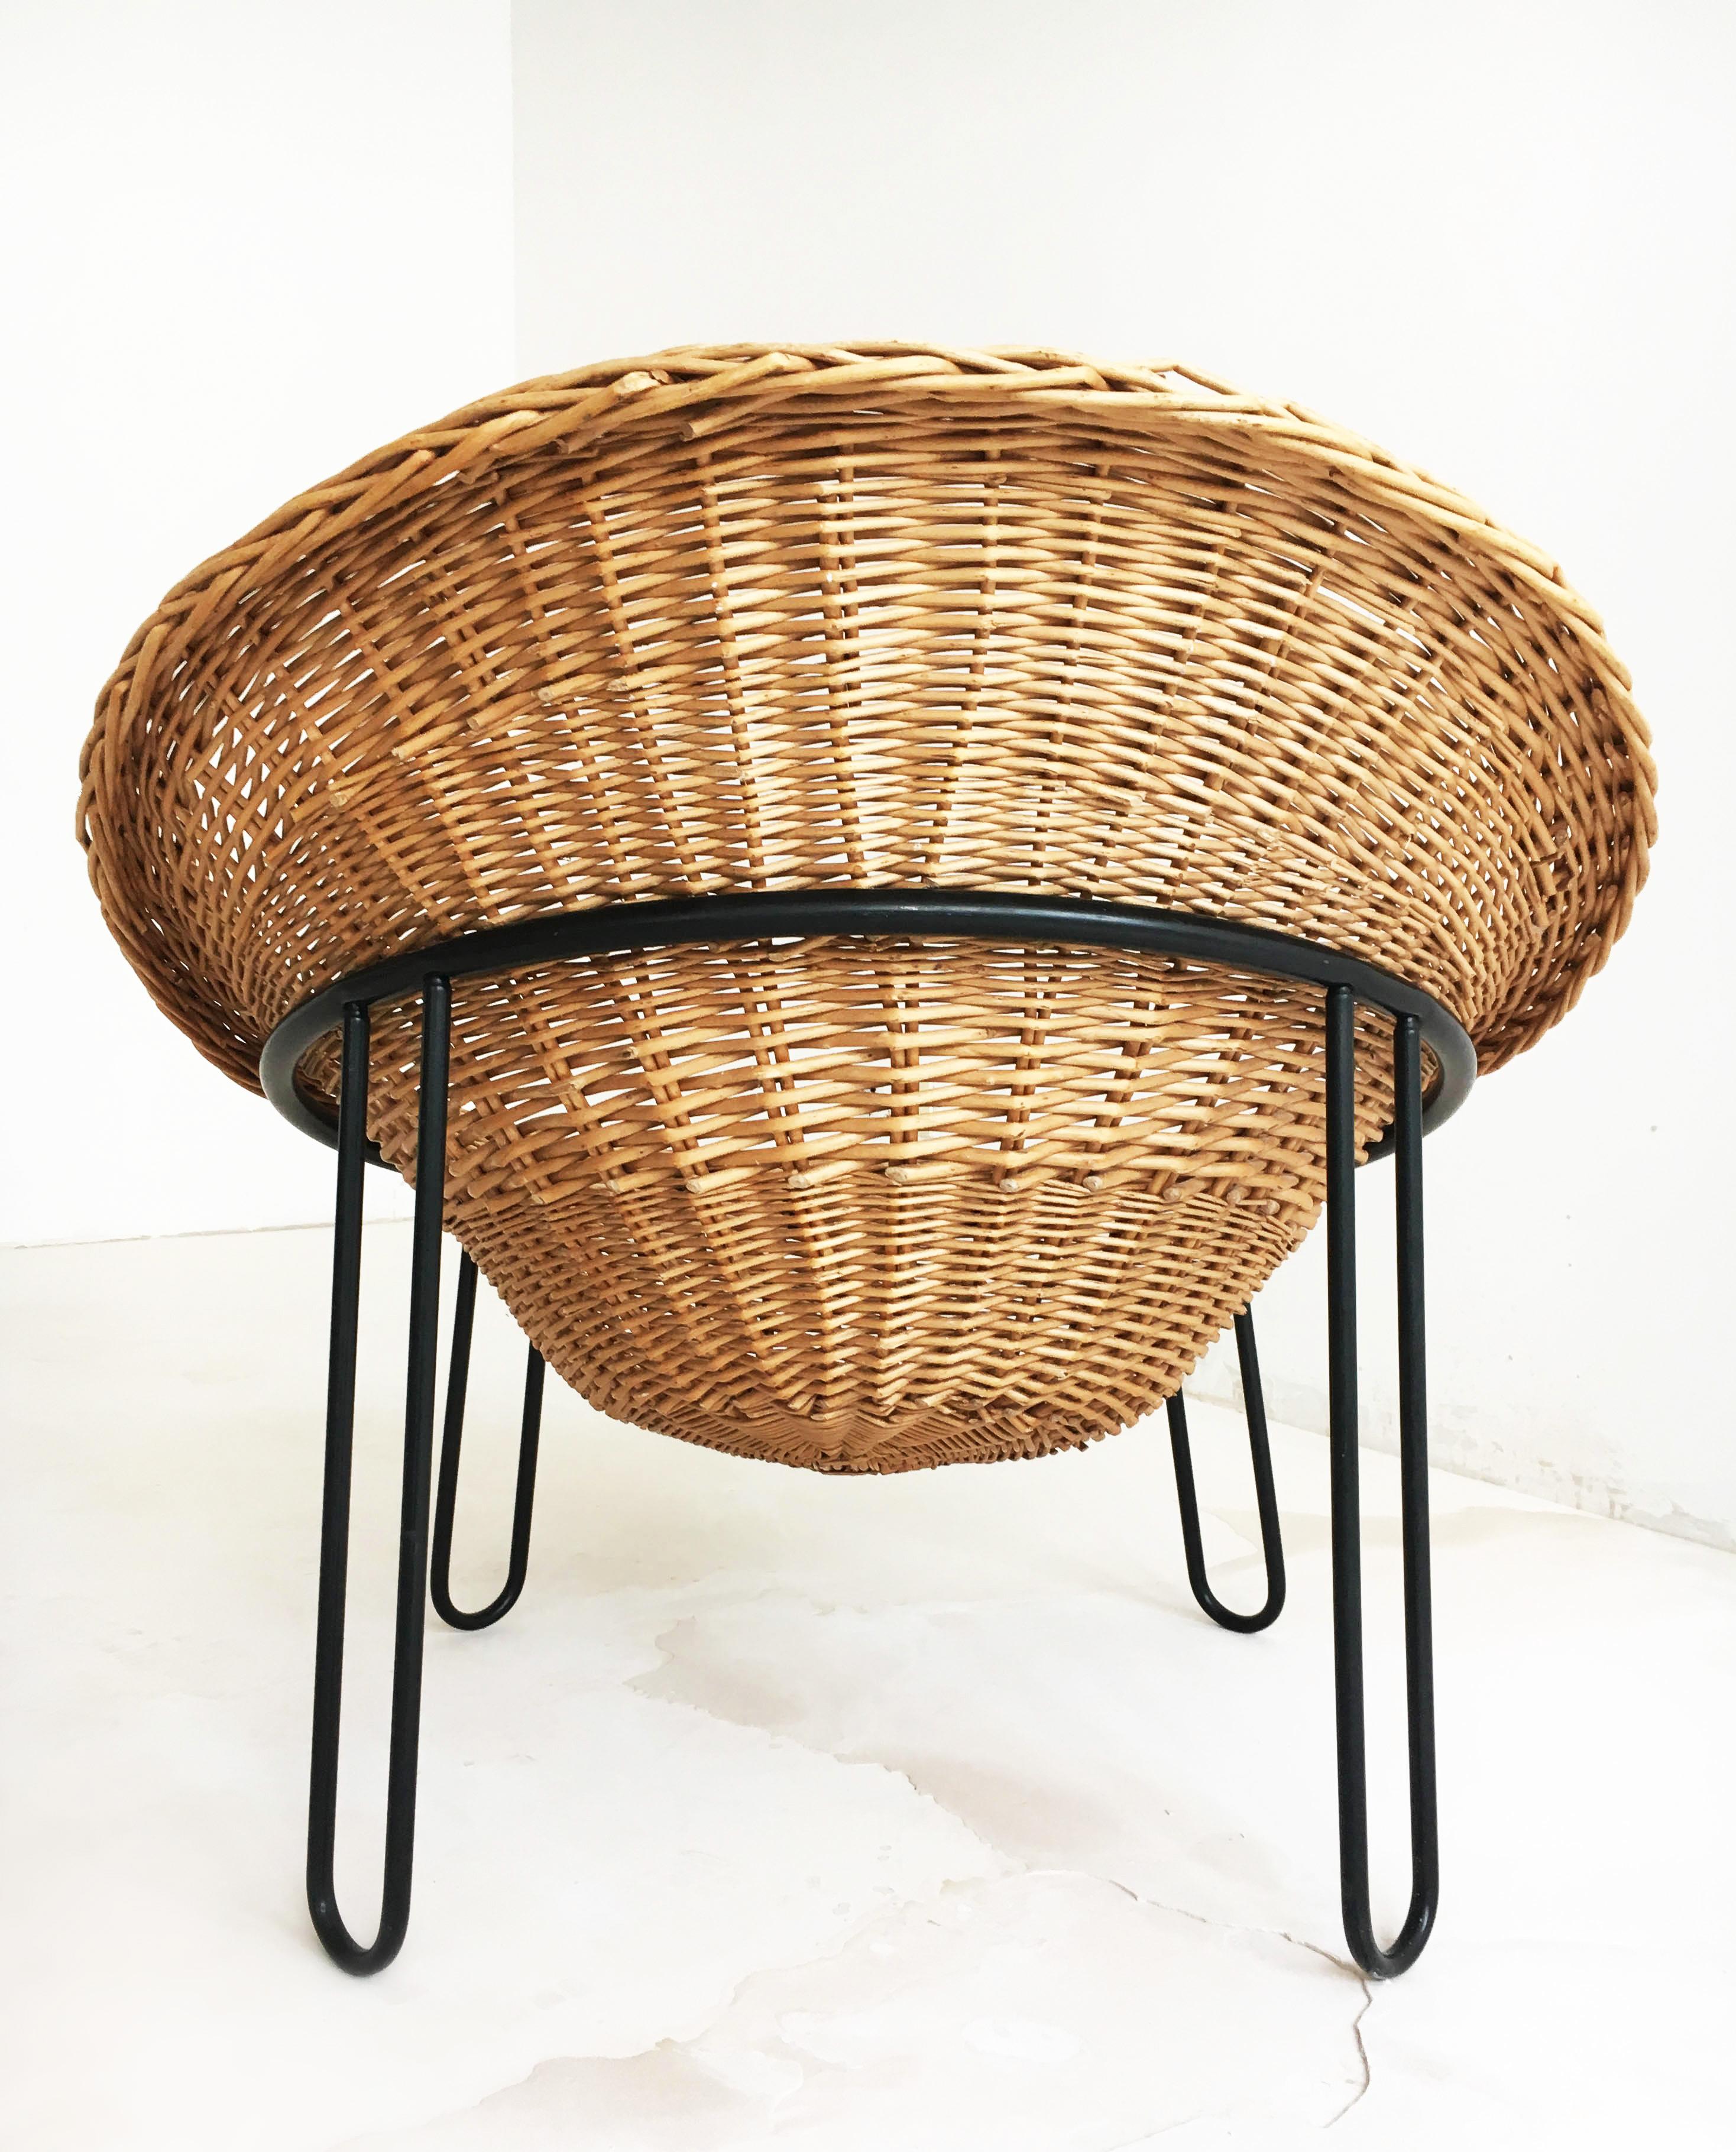 Willow Cone Lounge Chair, France, 1950s For Sale 2